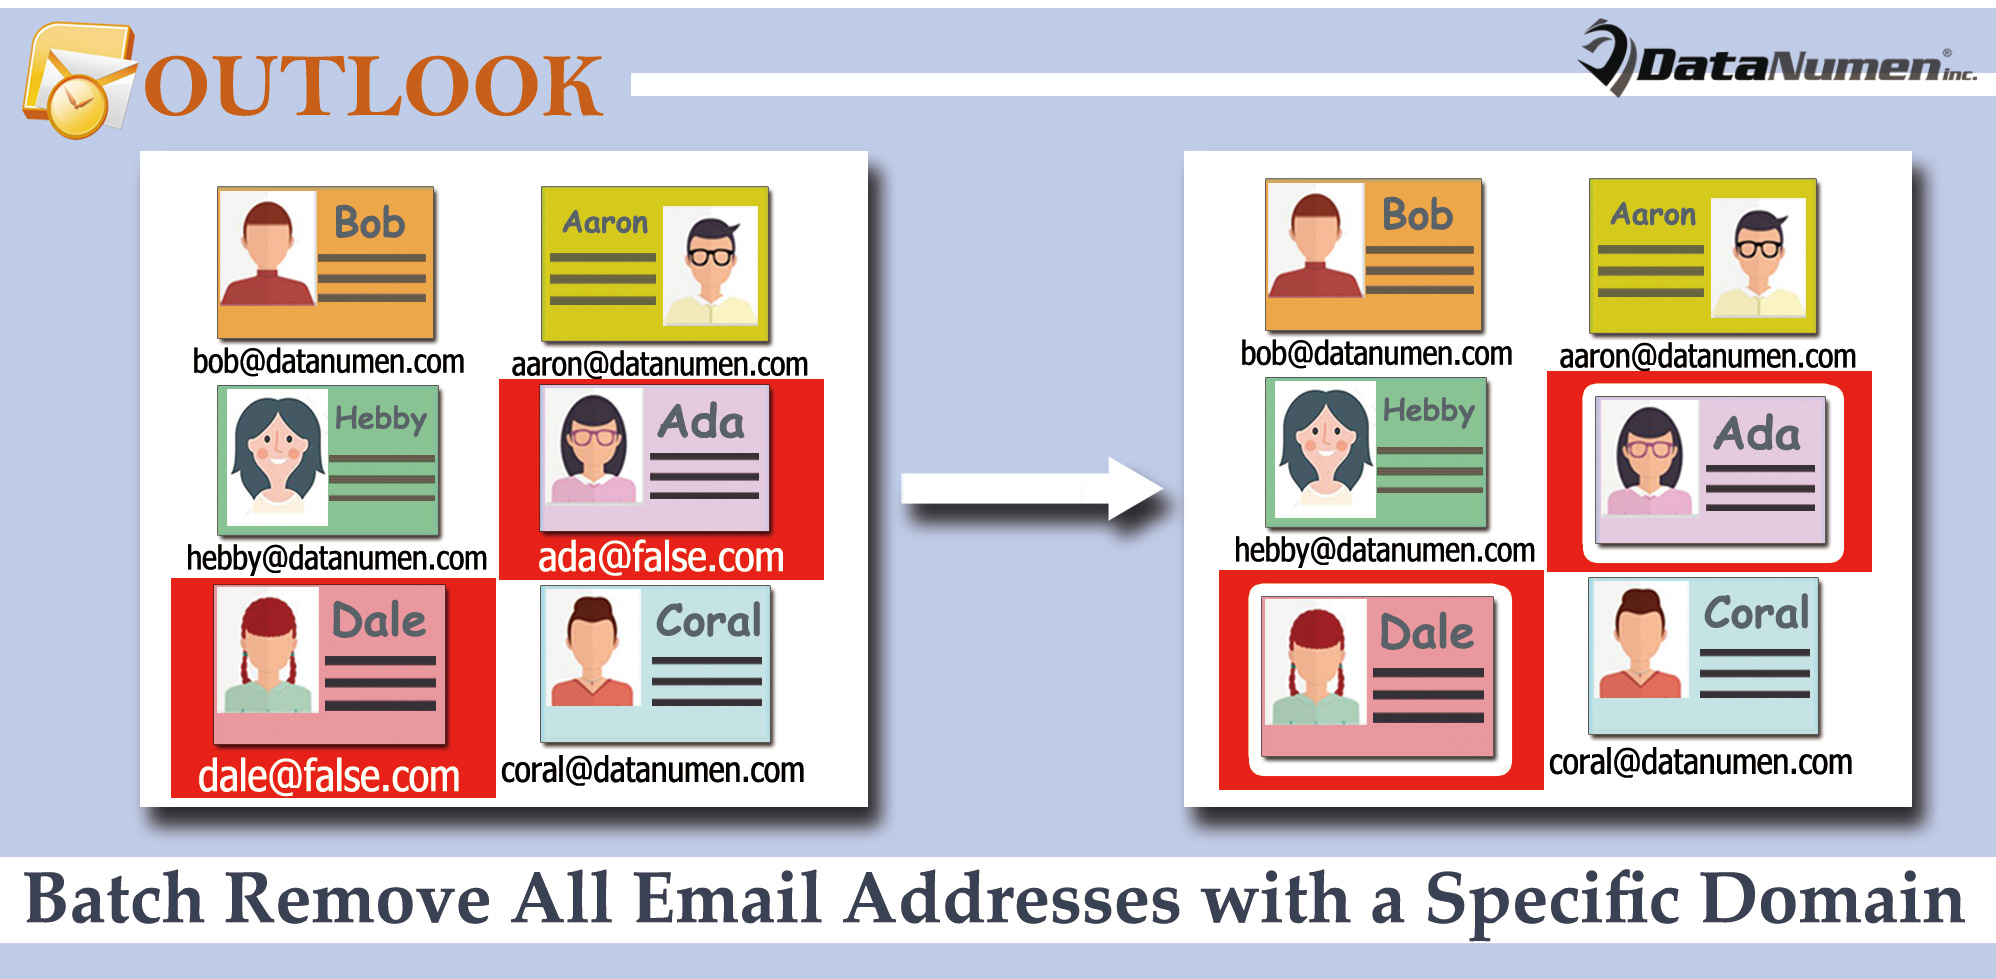 Batch Remove All Email Addresses with a Specific Domain from Your Outlook Contacts